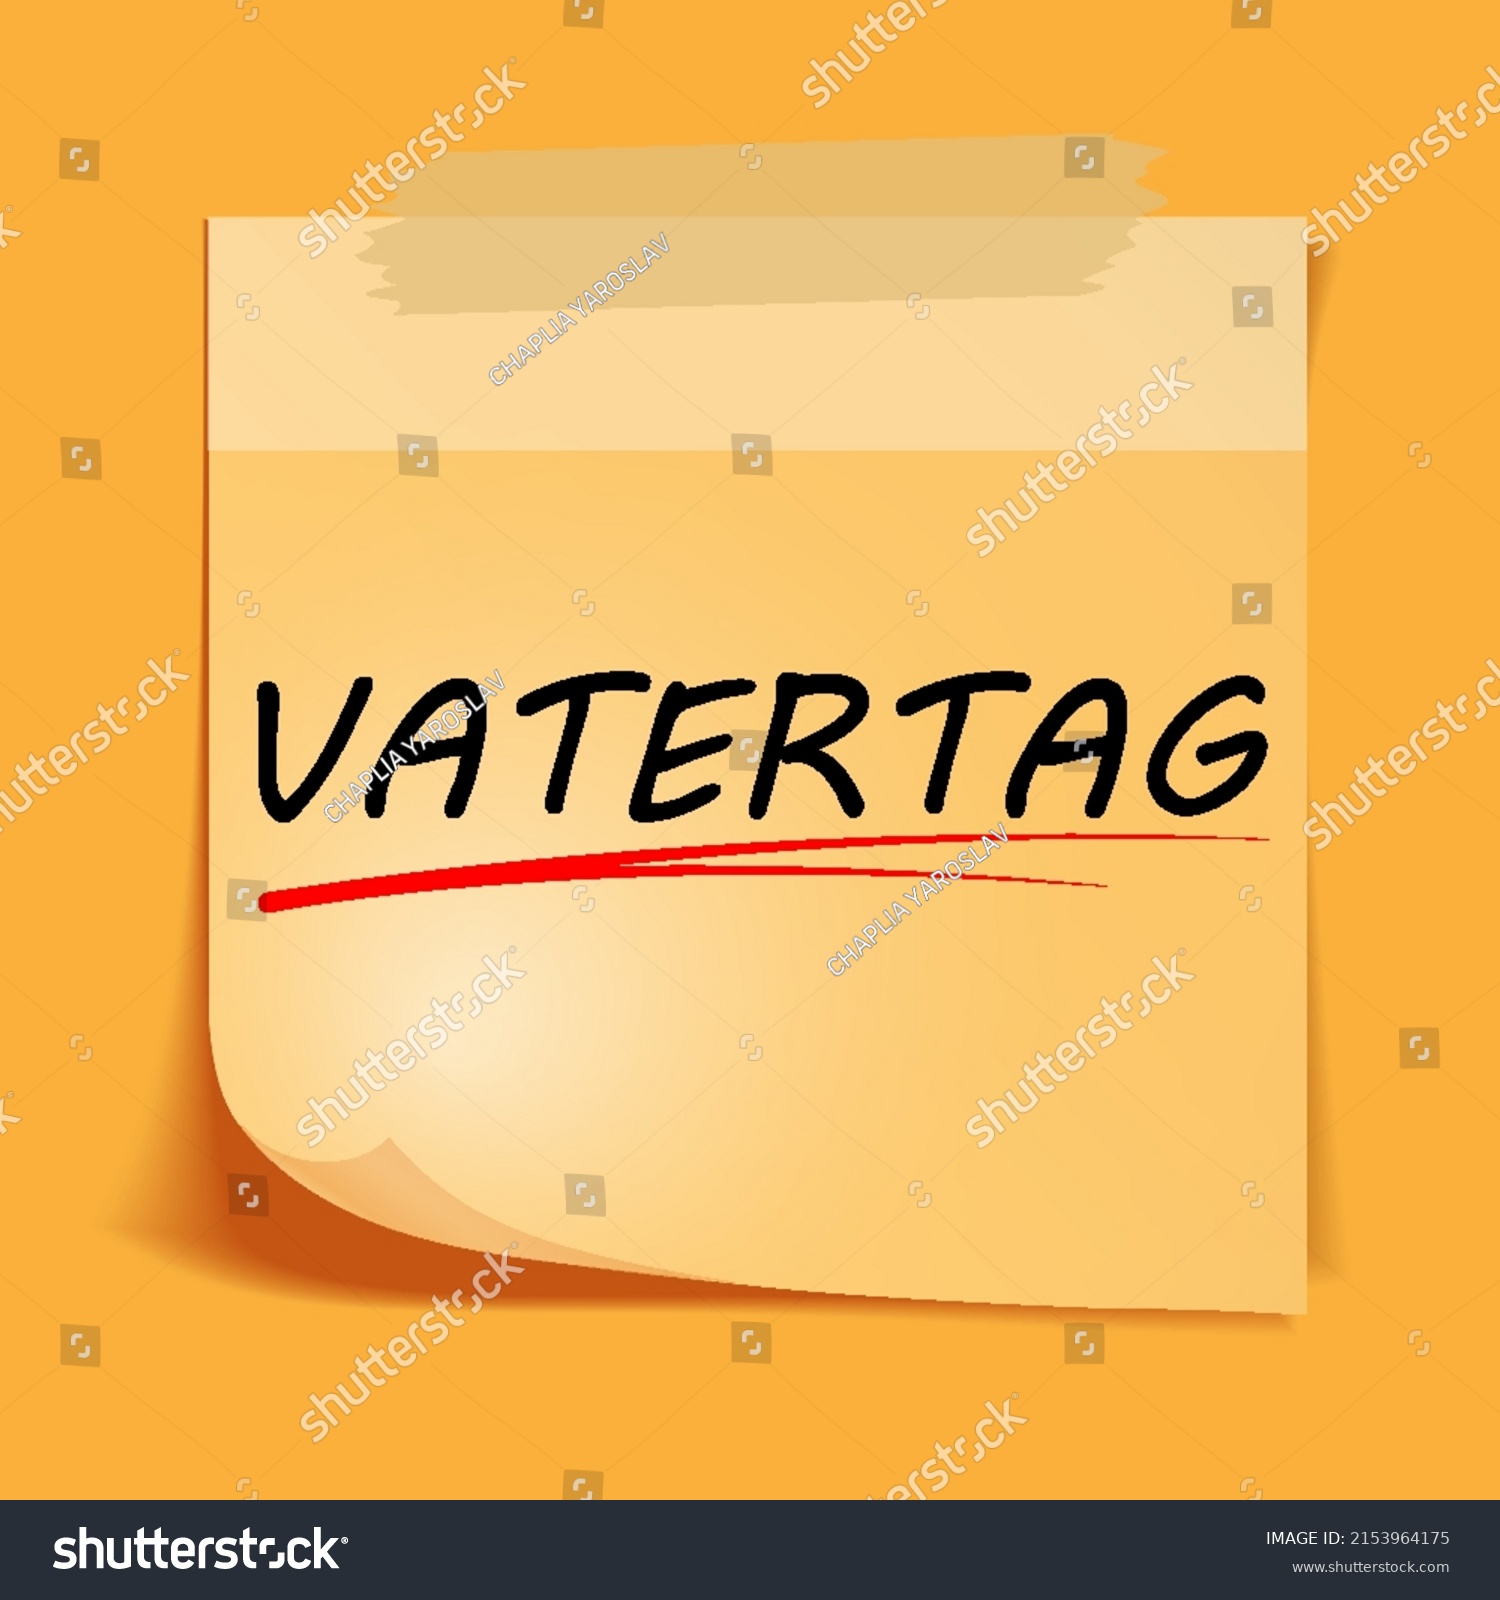 Vatertag Fathers Day Germany Vector Art Stock Vector (Royalty Free